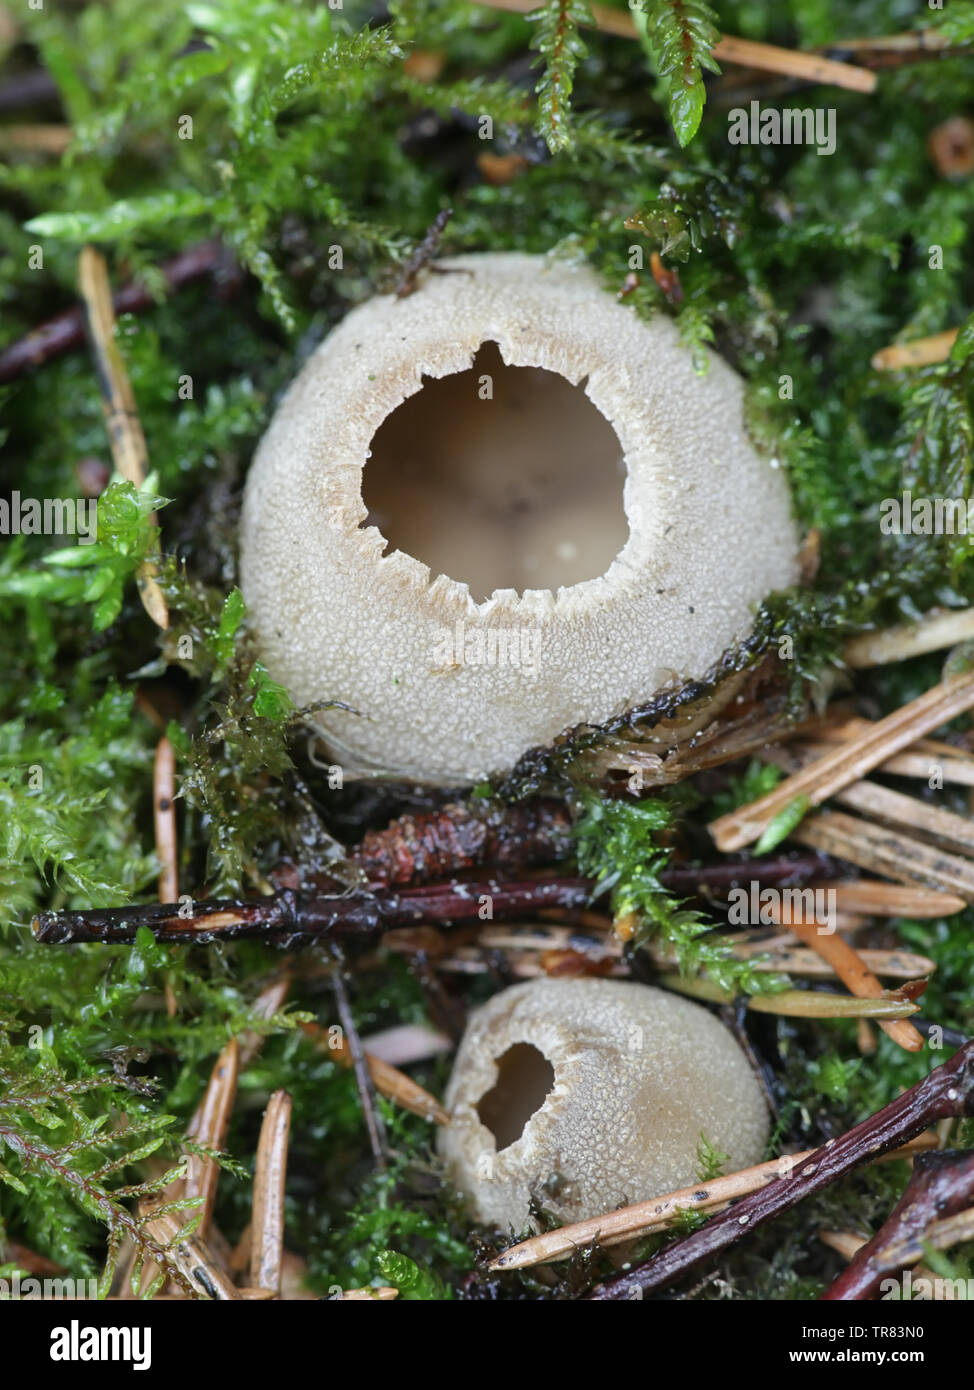 Tarzetta catinus, known as greater toothed cup fungus Stock Photo